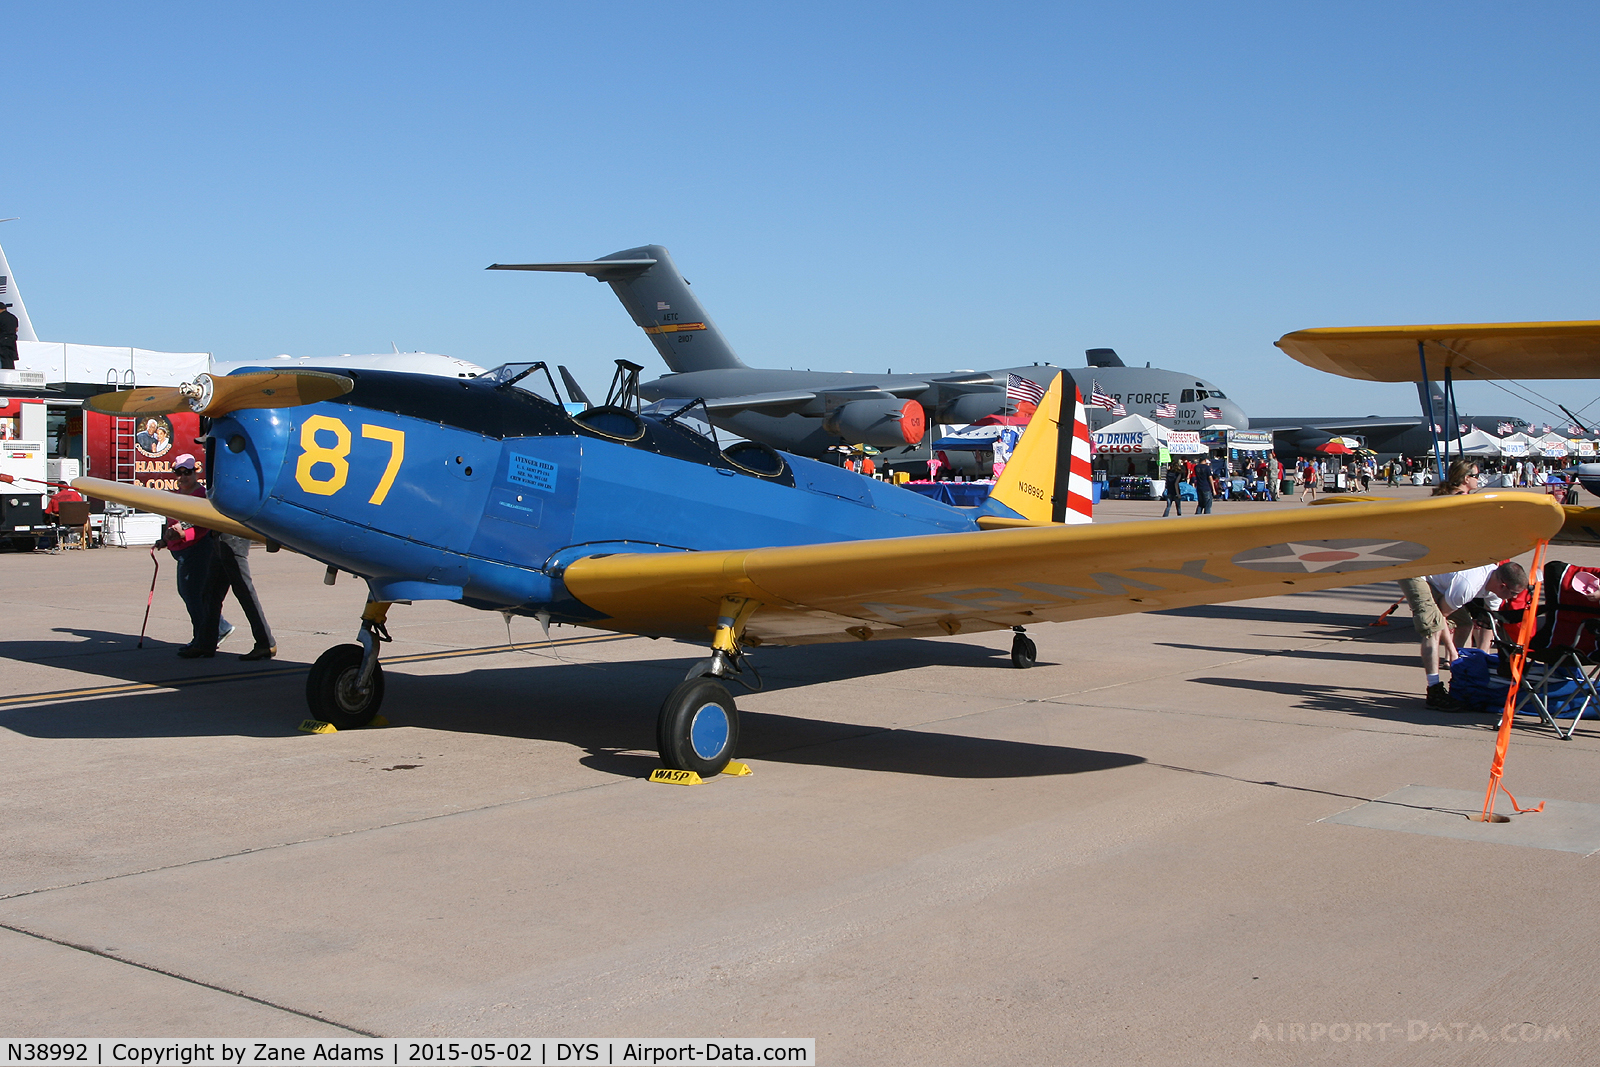 N38992, 1944 Fairchild PT-19 C/N 9014AE, At the 2015 Big Country Airshow, Dyess AFB, TX